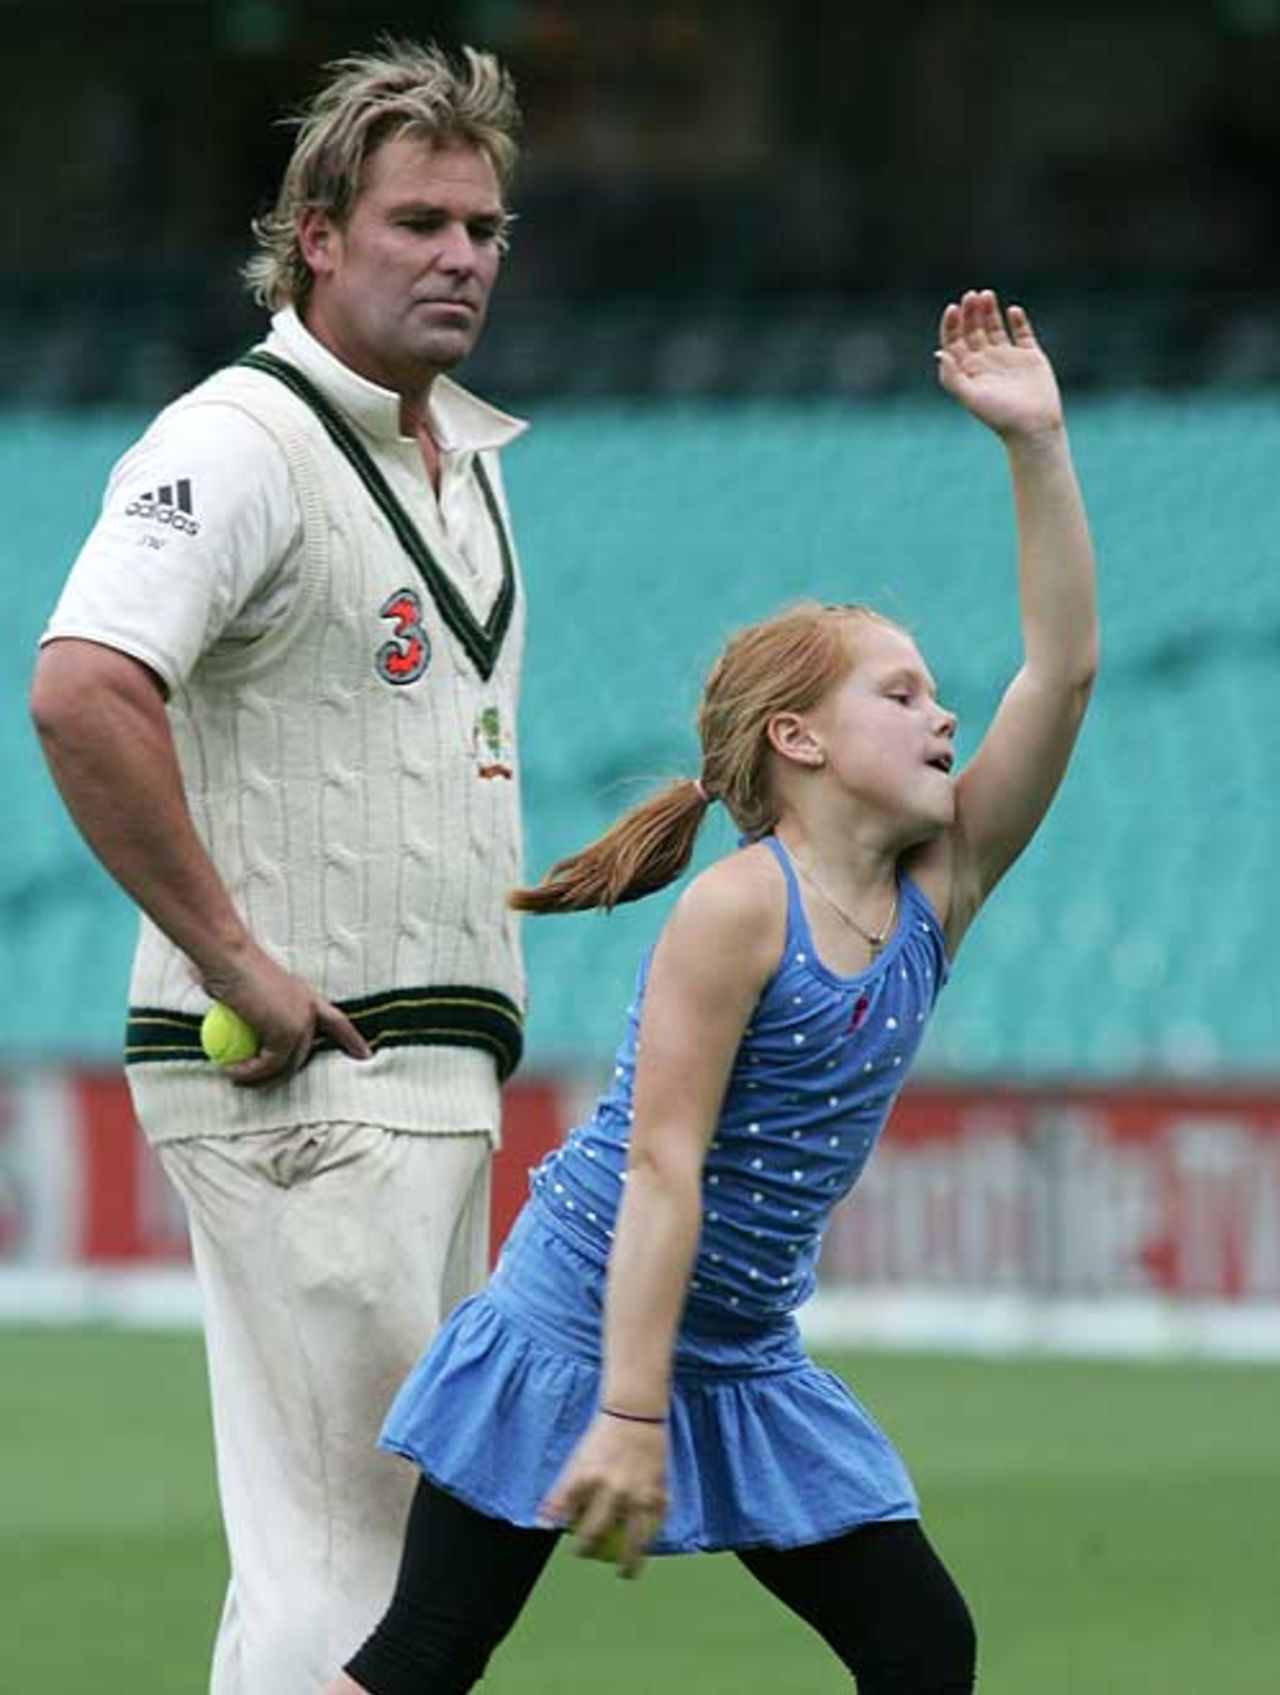 Shane Warne watches his daughter, Brooke, bowl on the SCG outfield, Australia v England, 5th Test, Sydney, January 2, 2007